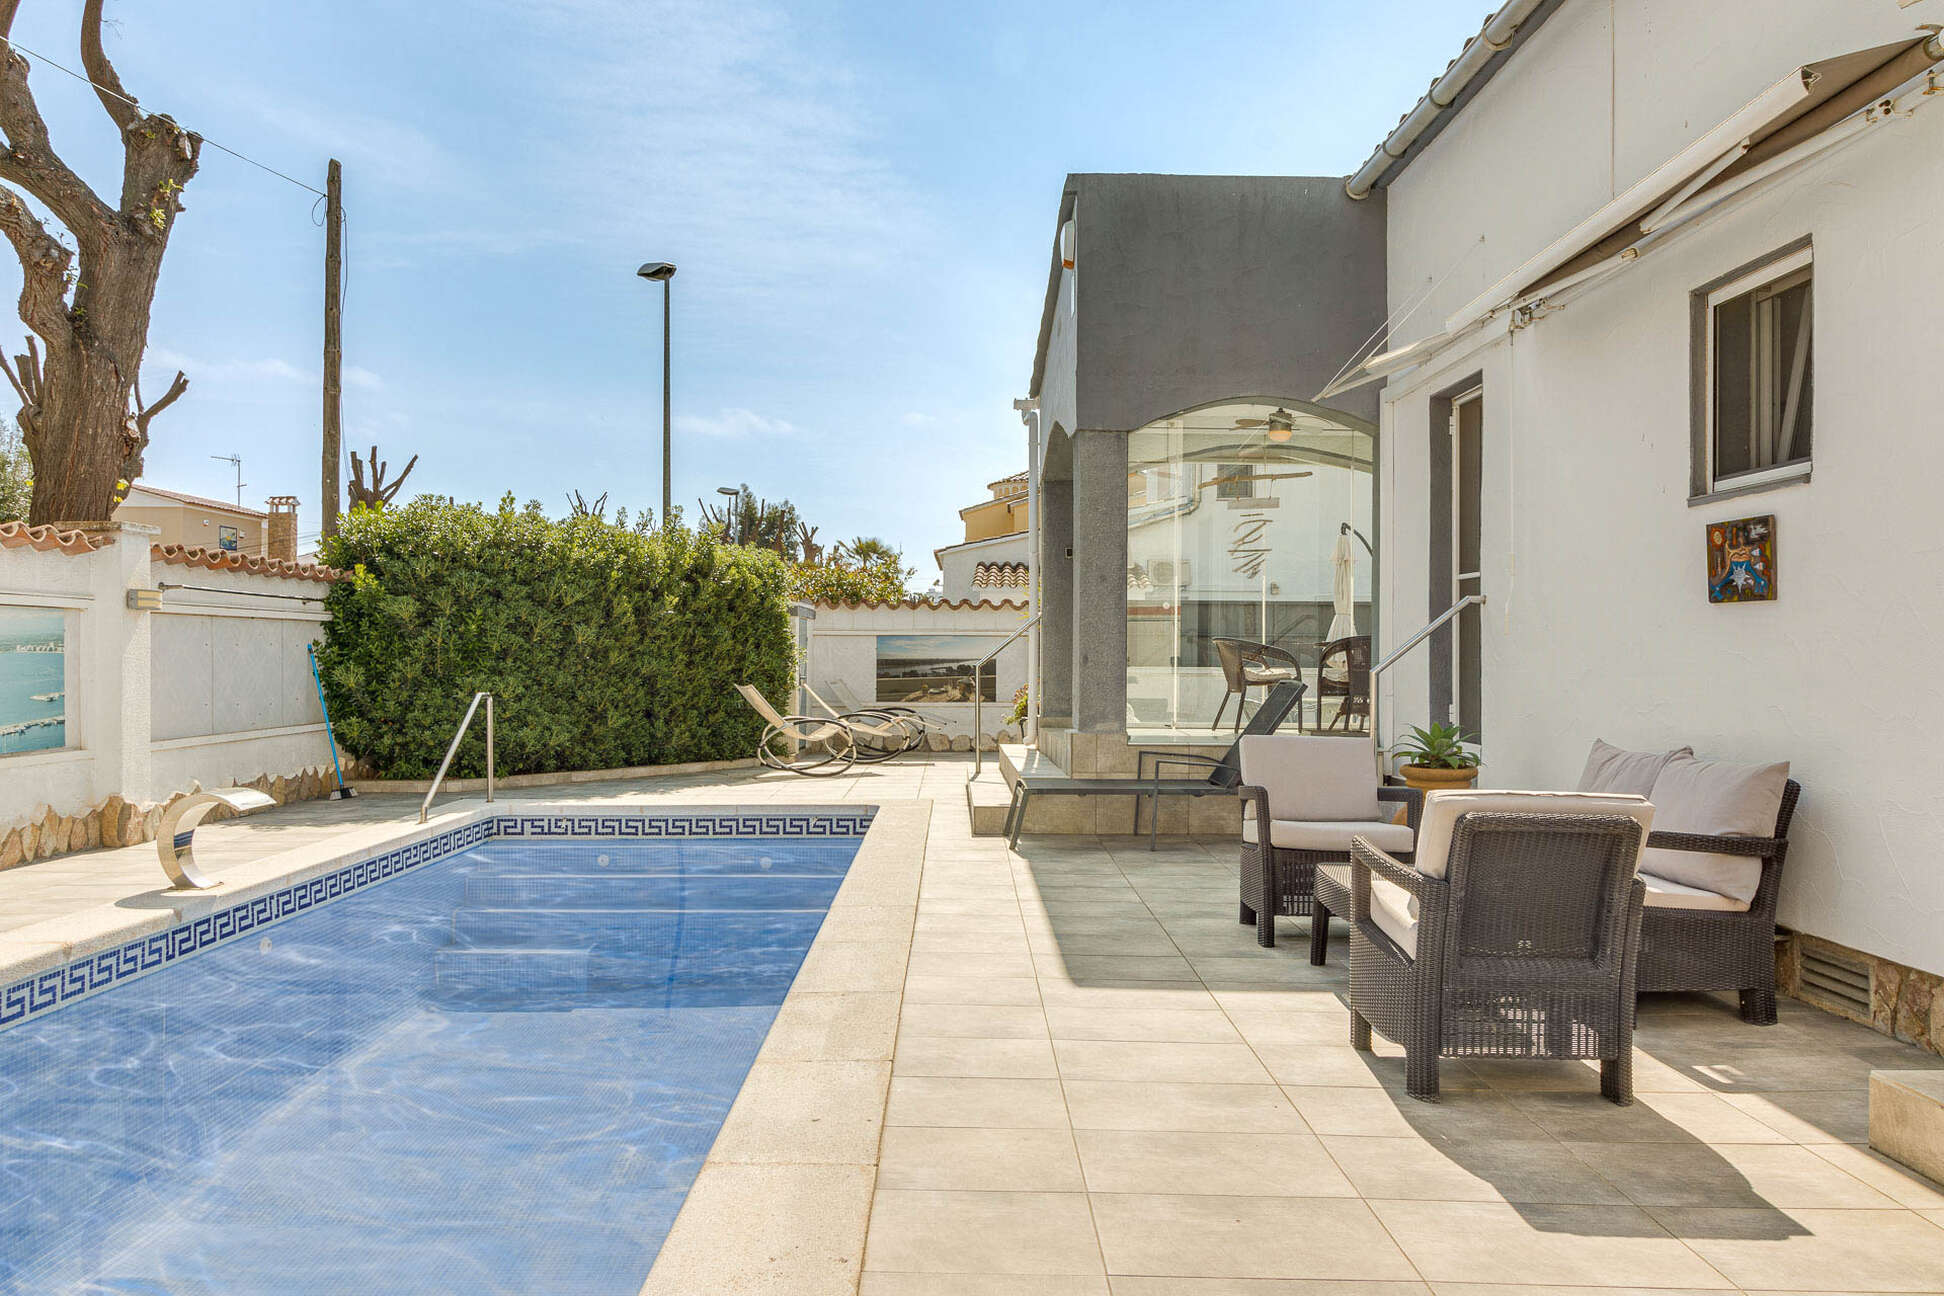 House/Villa with large pool for sale in Empuriabrava